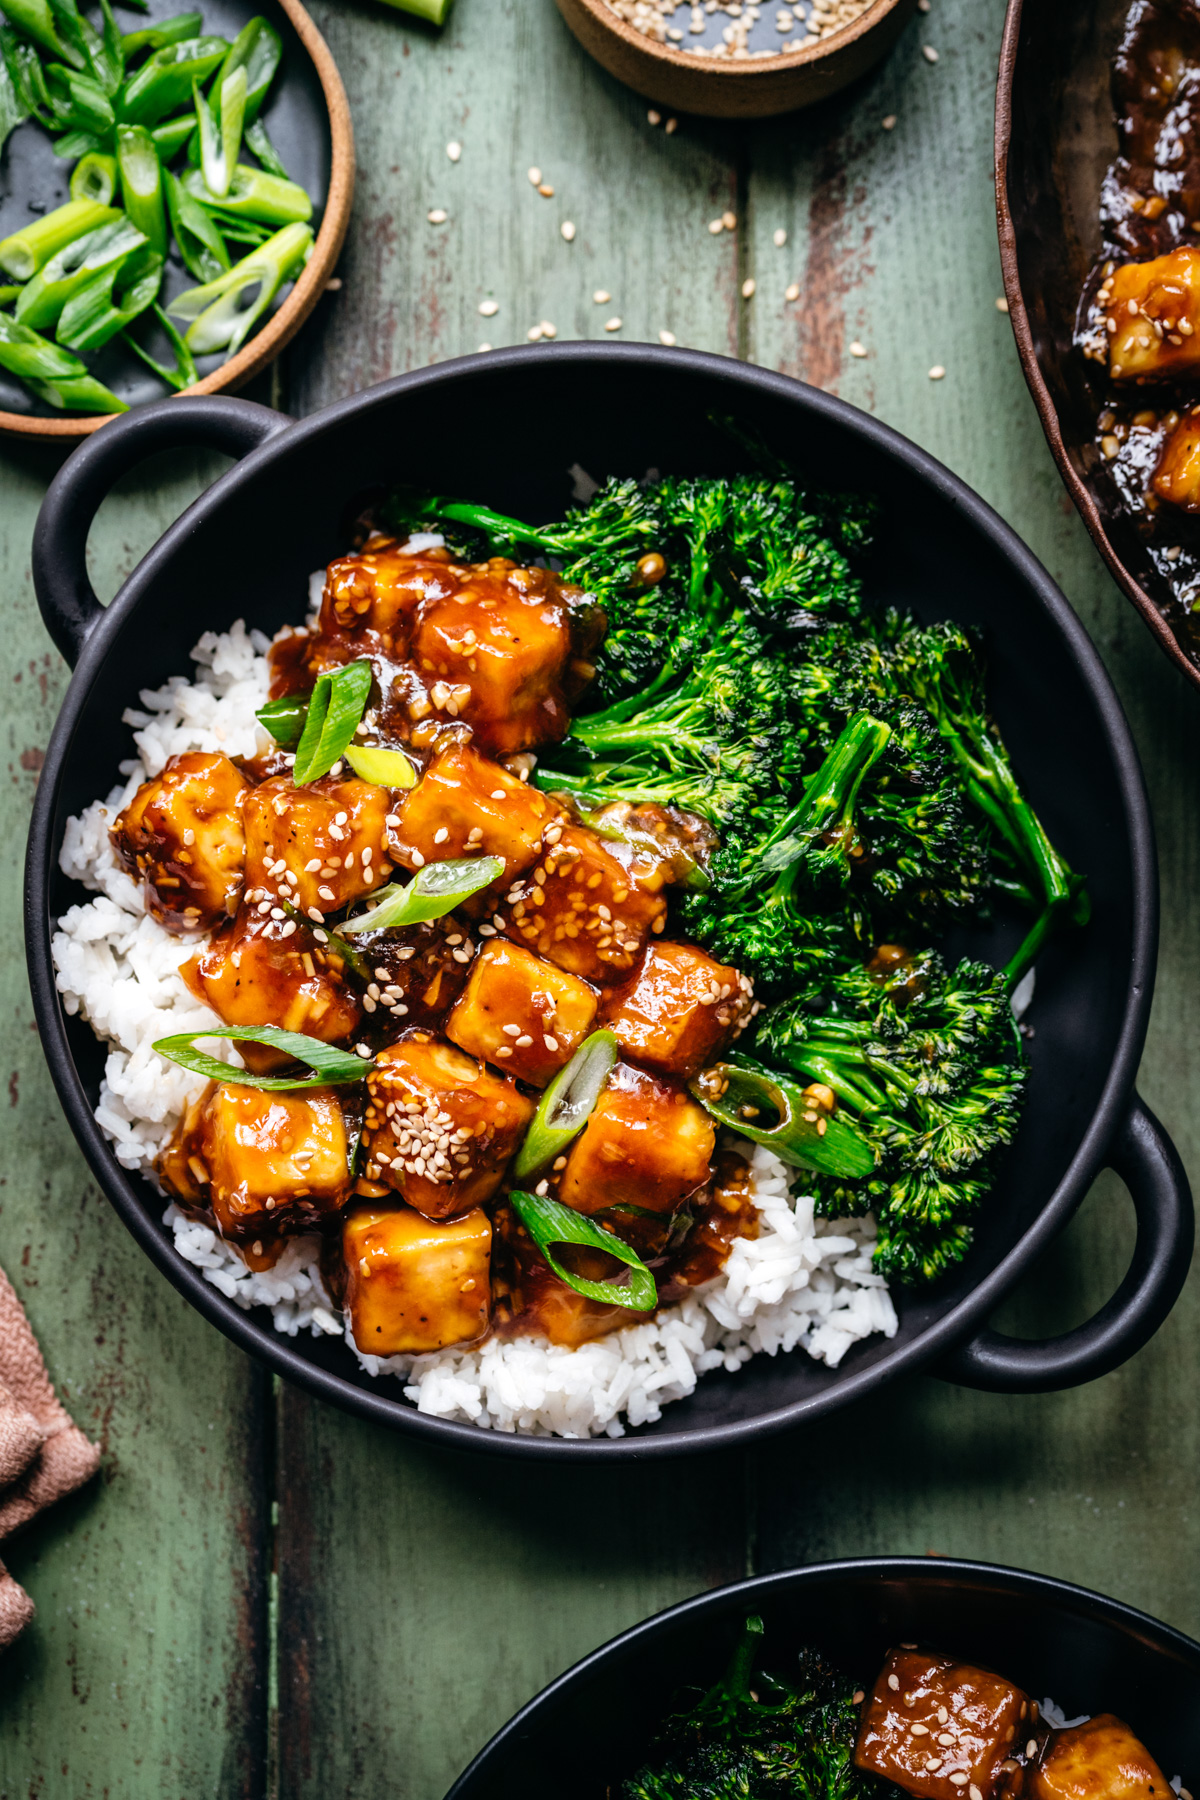 Overhead view of tofu teriyaki in a bowl over rice and broccoli.